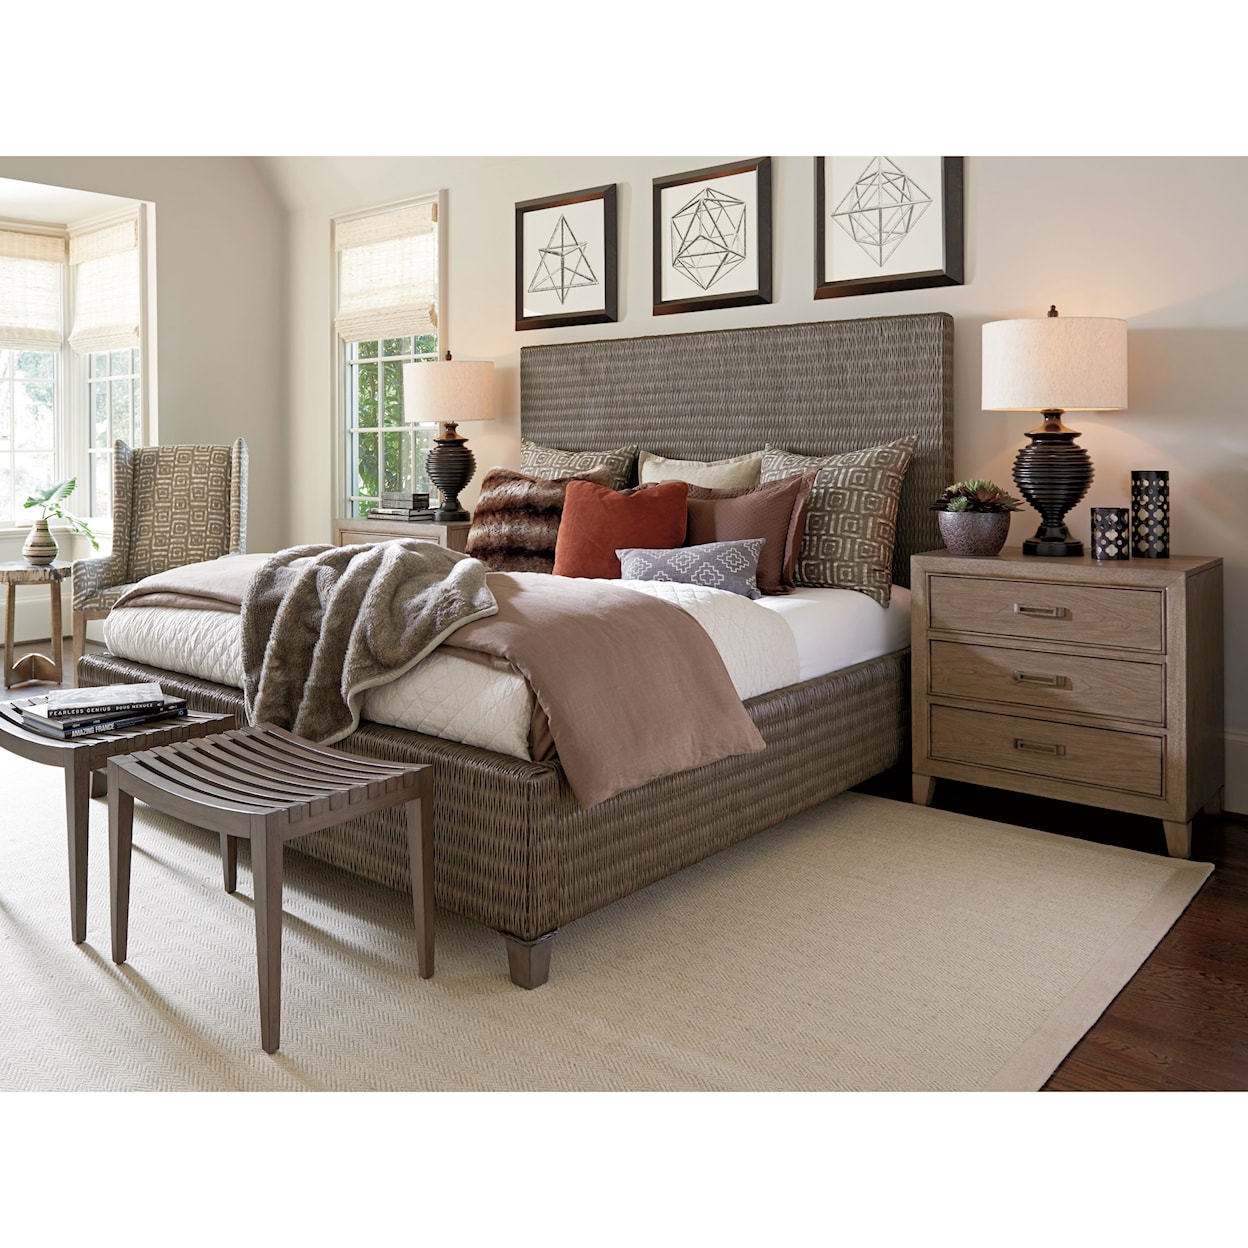 Tommy Bahama Home Cypress Point King Bedroom Group